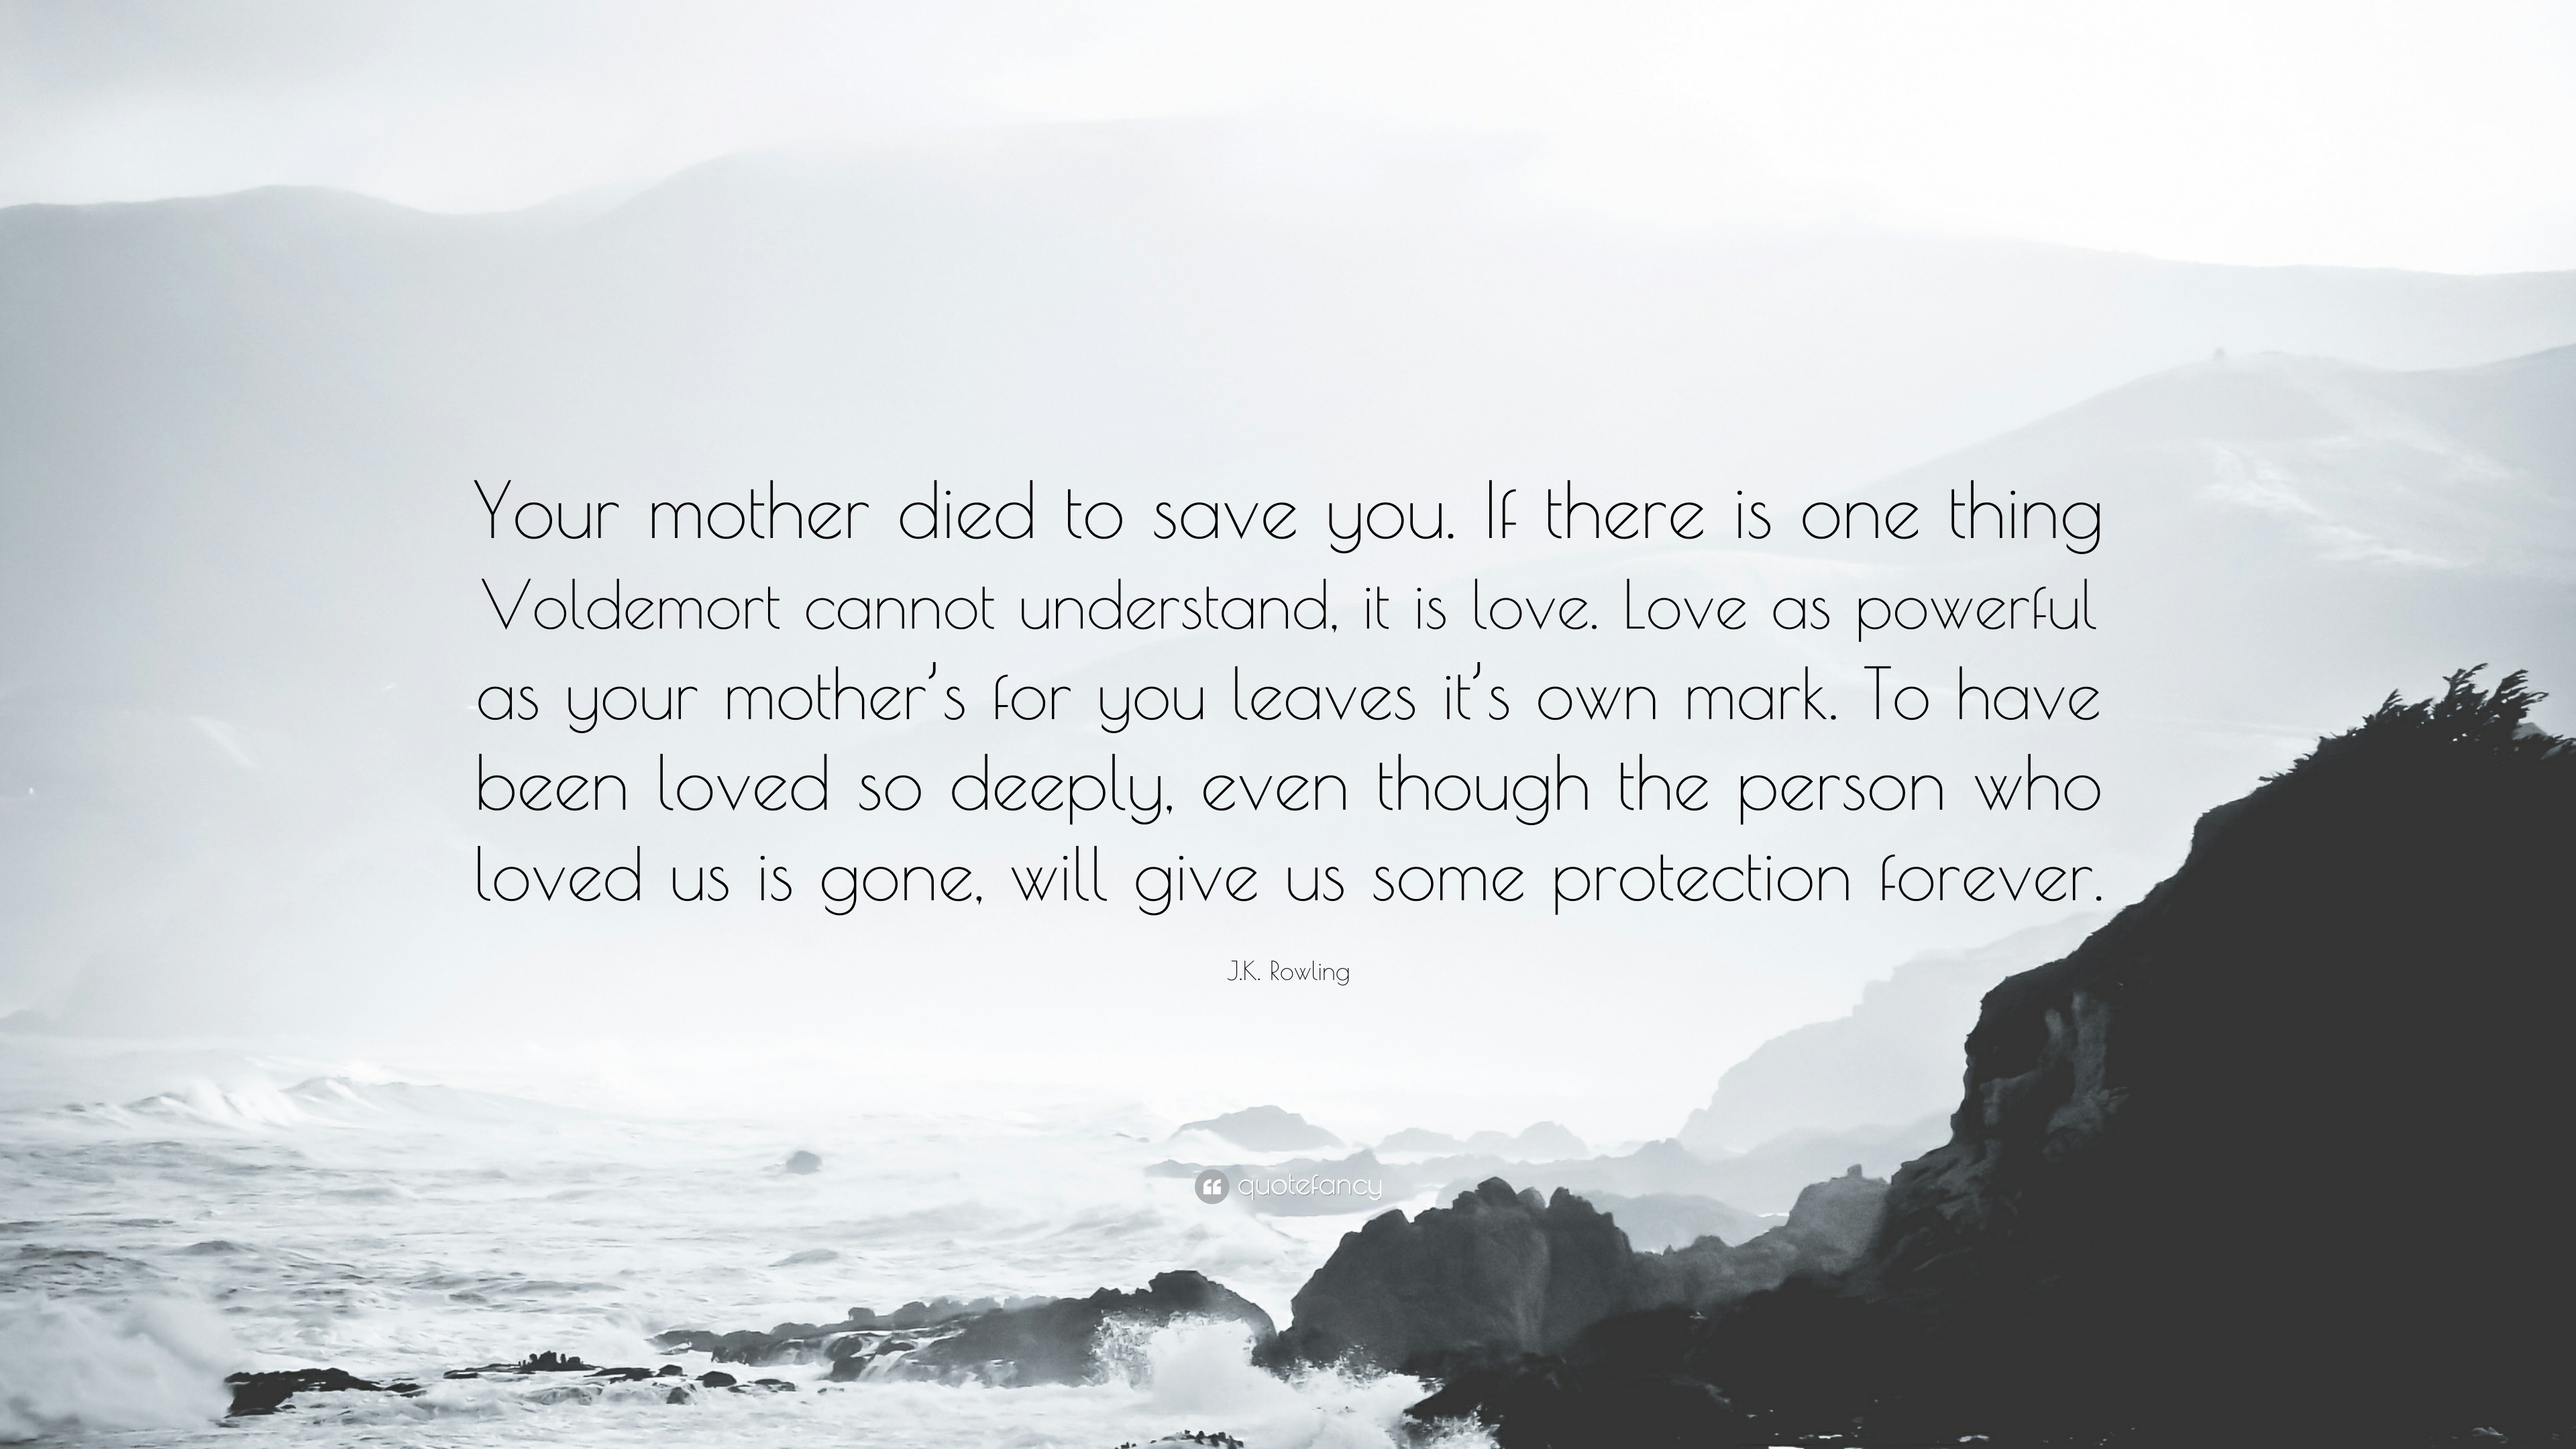 J K Rowling Quote “Your mother d to save you If there is one